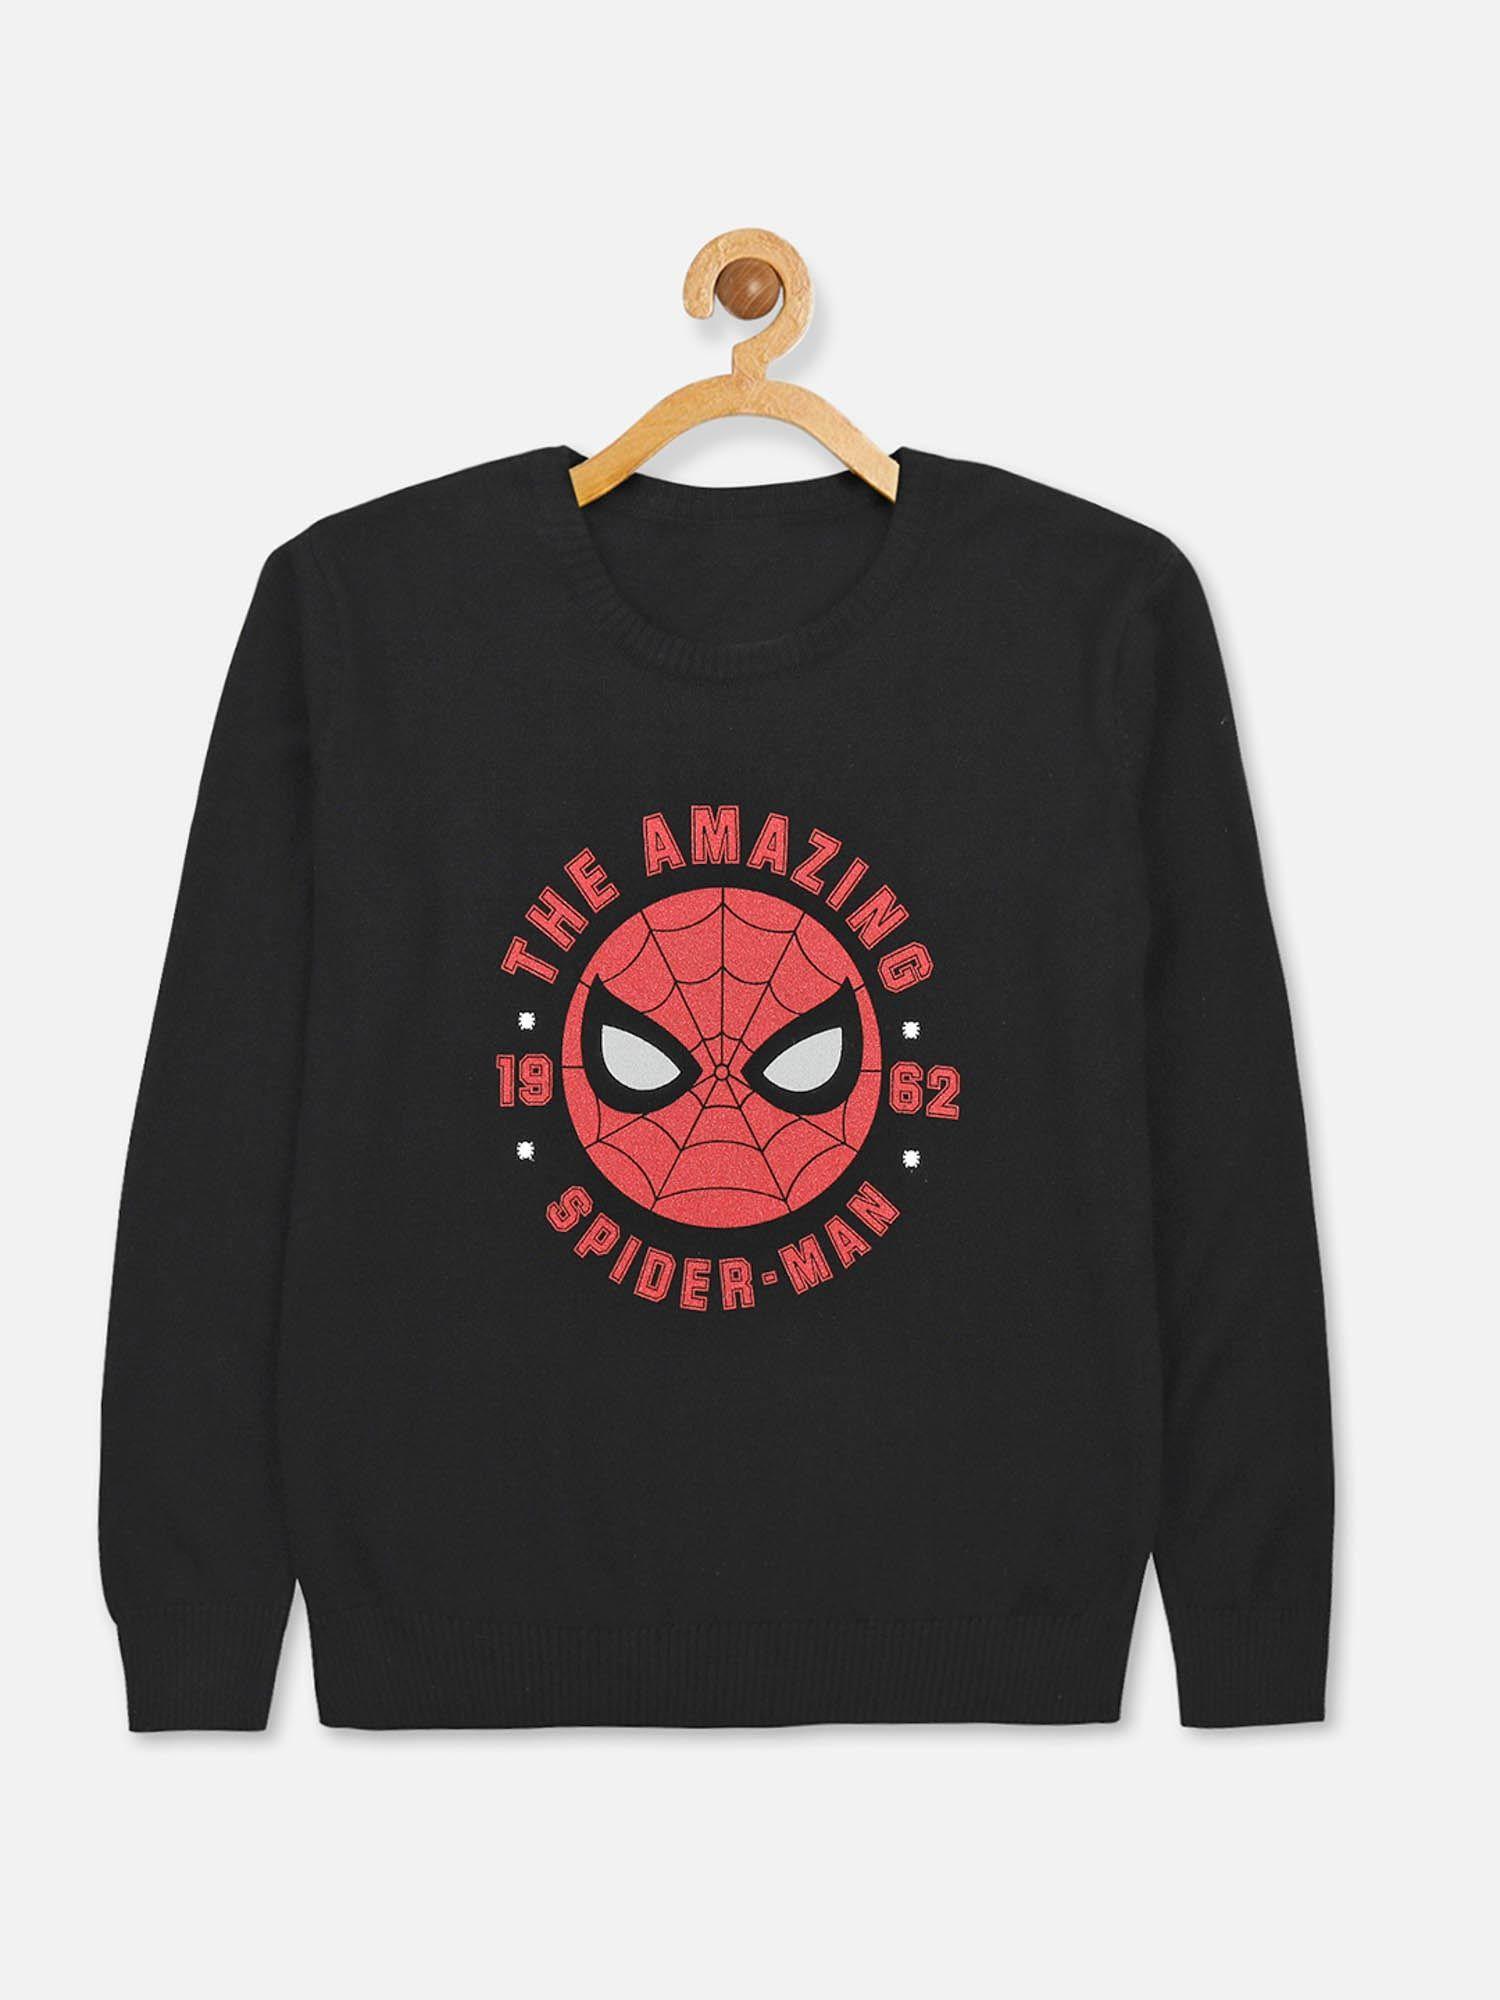 spiderman printed black sweater for boys